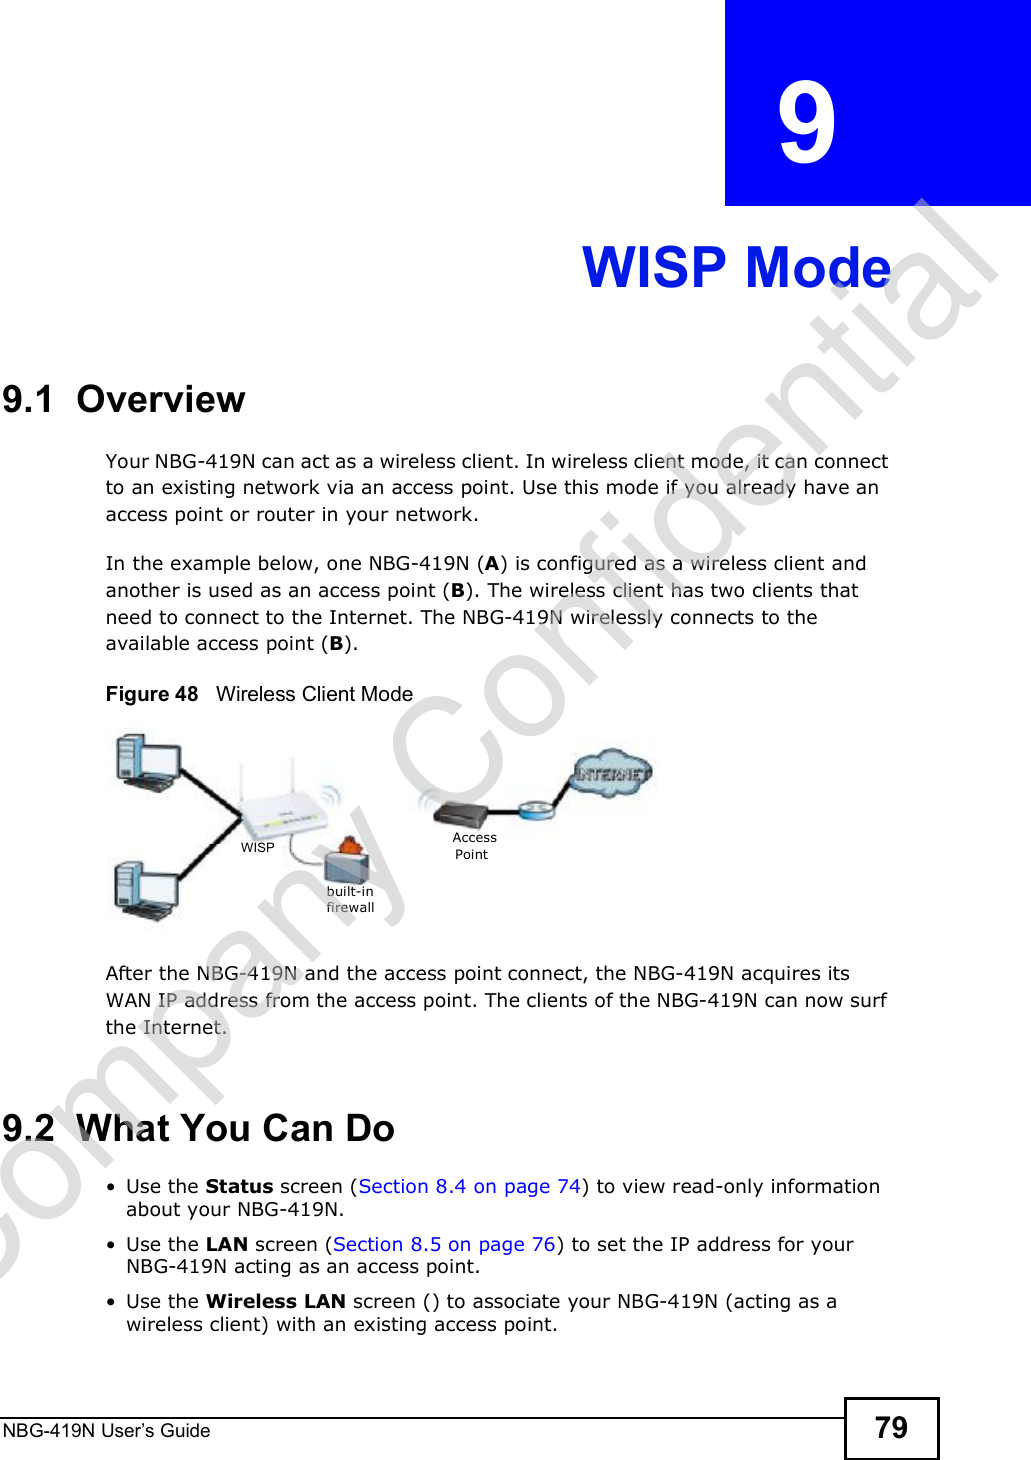 NBG-419N User s Guide 79CHAPTER  9 WISP Mode9.1  OverviewYour NBG-419N can act as a wireless client. In wireless client mode, it can connect to an existing network via an access point. Use this mode if you already have an access point or router in your network.In the example below, one NBG-419N (A) is configured as a wireless client and another is used as an access point (B). The wireless client has two clients that need to connect to the Internet. The NBG-419N wirelessly connects to the available access point (B). Figure 48   Wireless Client ModeAfter the NBG-419N and the access point connect, the NBG-419N acquires its WAN IP address from the access point. The clients of the NBG-419N can now surf the Internet. 9.2  What You Can Do Use the Status screen (Section 8.4 on page 74) to view read-only information about your NBG-419N. Use the LAN screen (Section 8.5 on page 76) to set the IP address for your NBG-419N acting as an access point. Use the Wireless LAN screen () to associate your NBG-419N (acting as a wireless client) with an existing access point.built-infirewallAccessPointWISPCompany Confidential